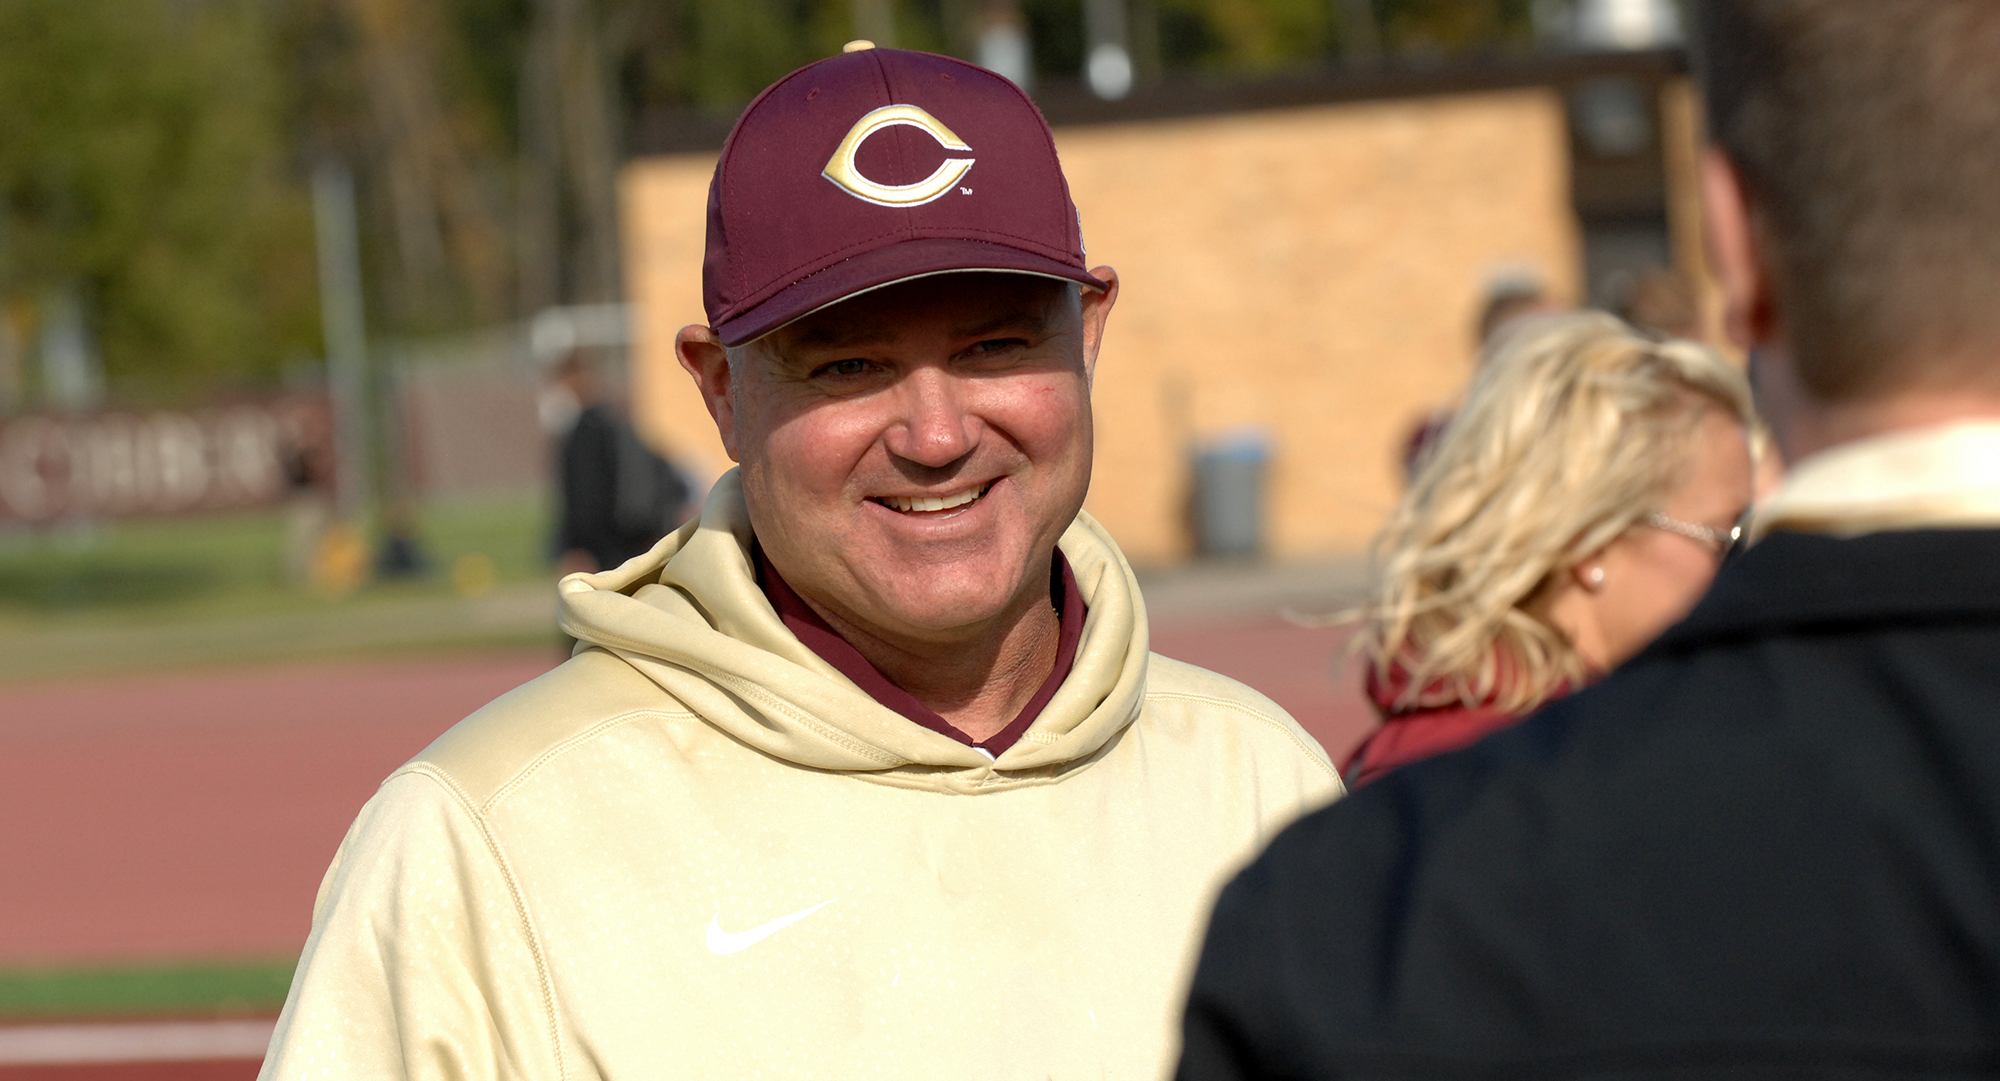 Head Coach Terry Horan announced the addition of new coaches to the Cobber football staff, as well as a positional change.